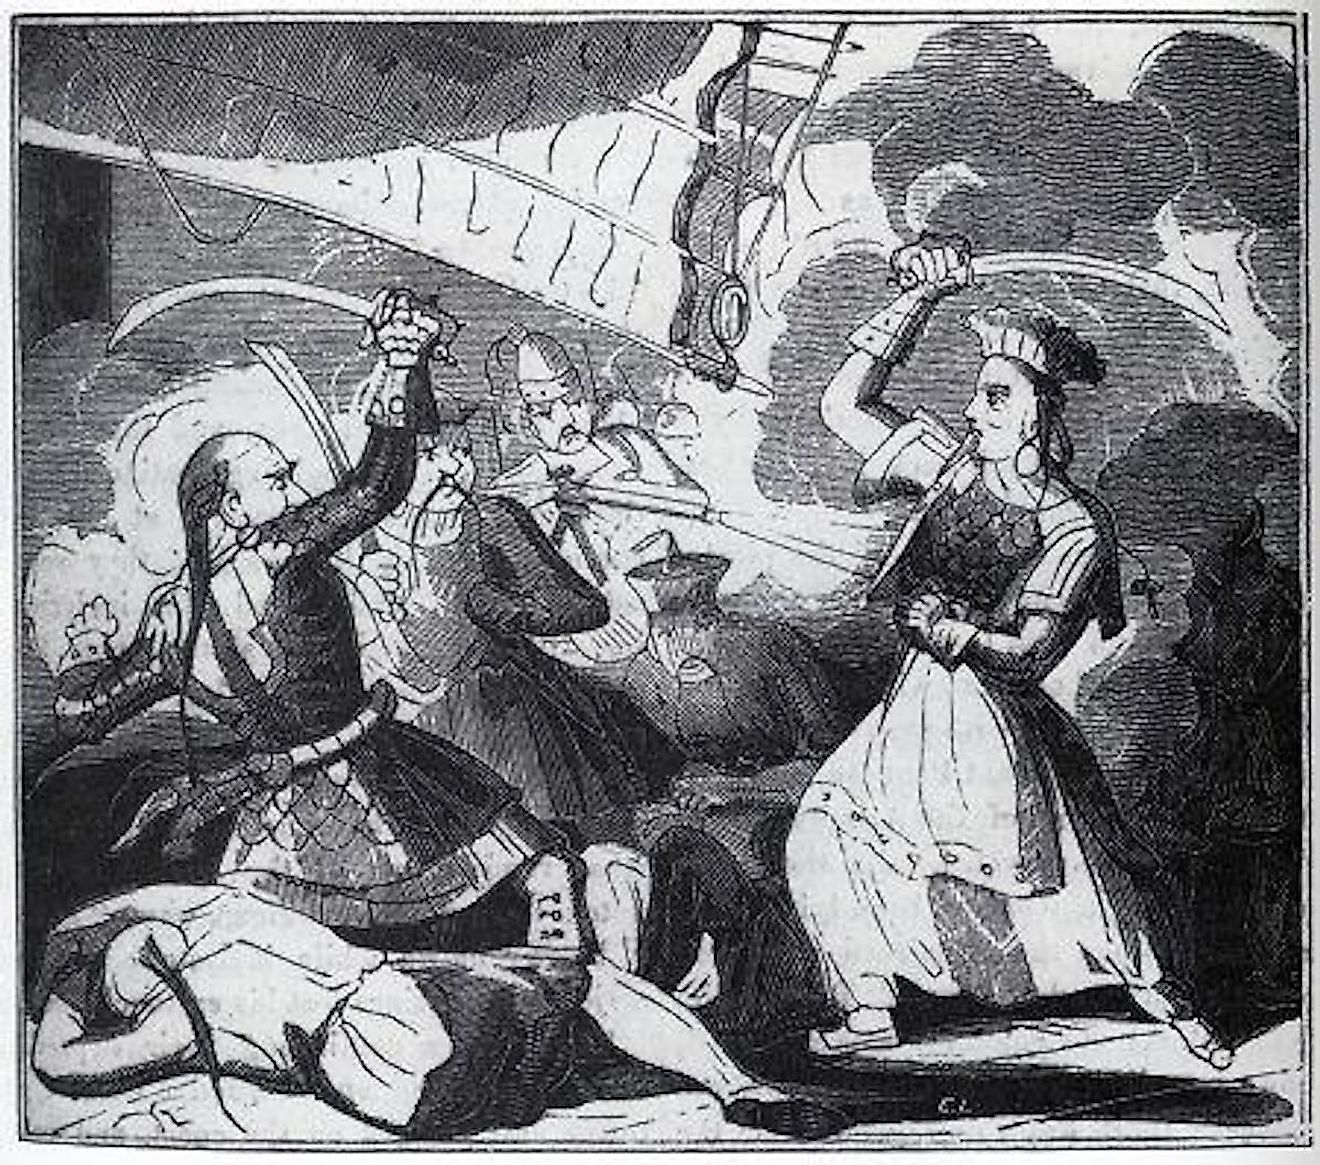 Ching Shih was a daring and infamous female pirate. 